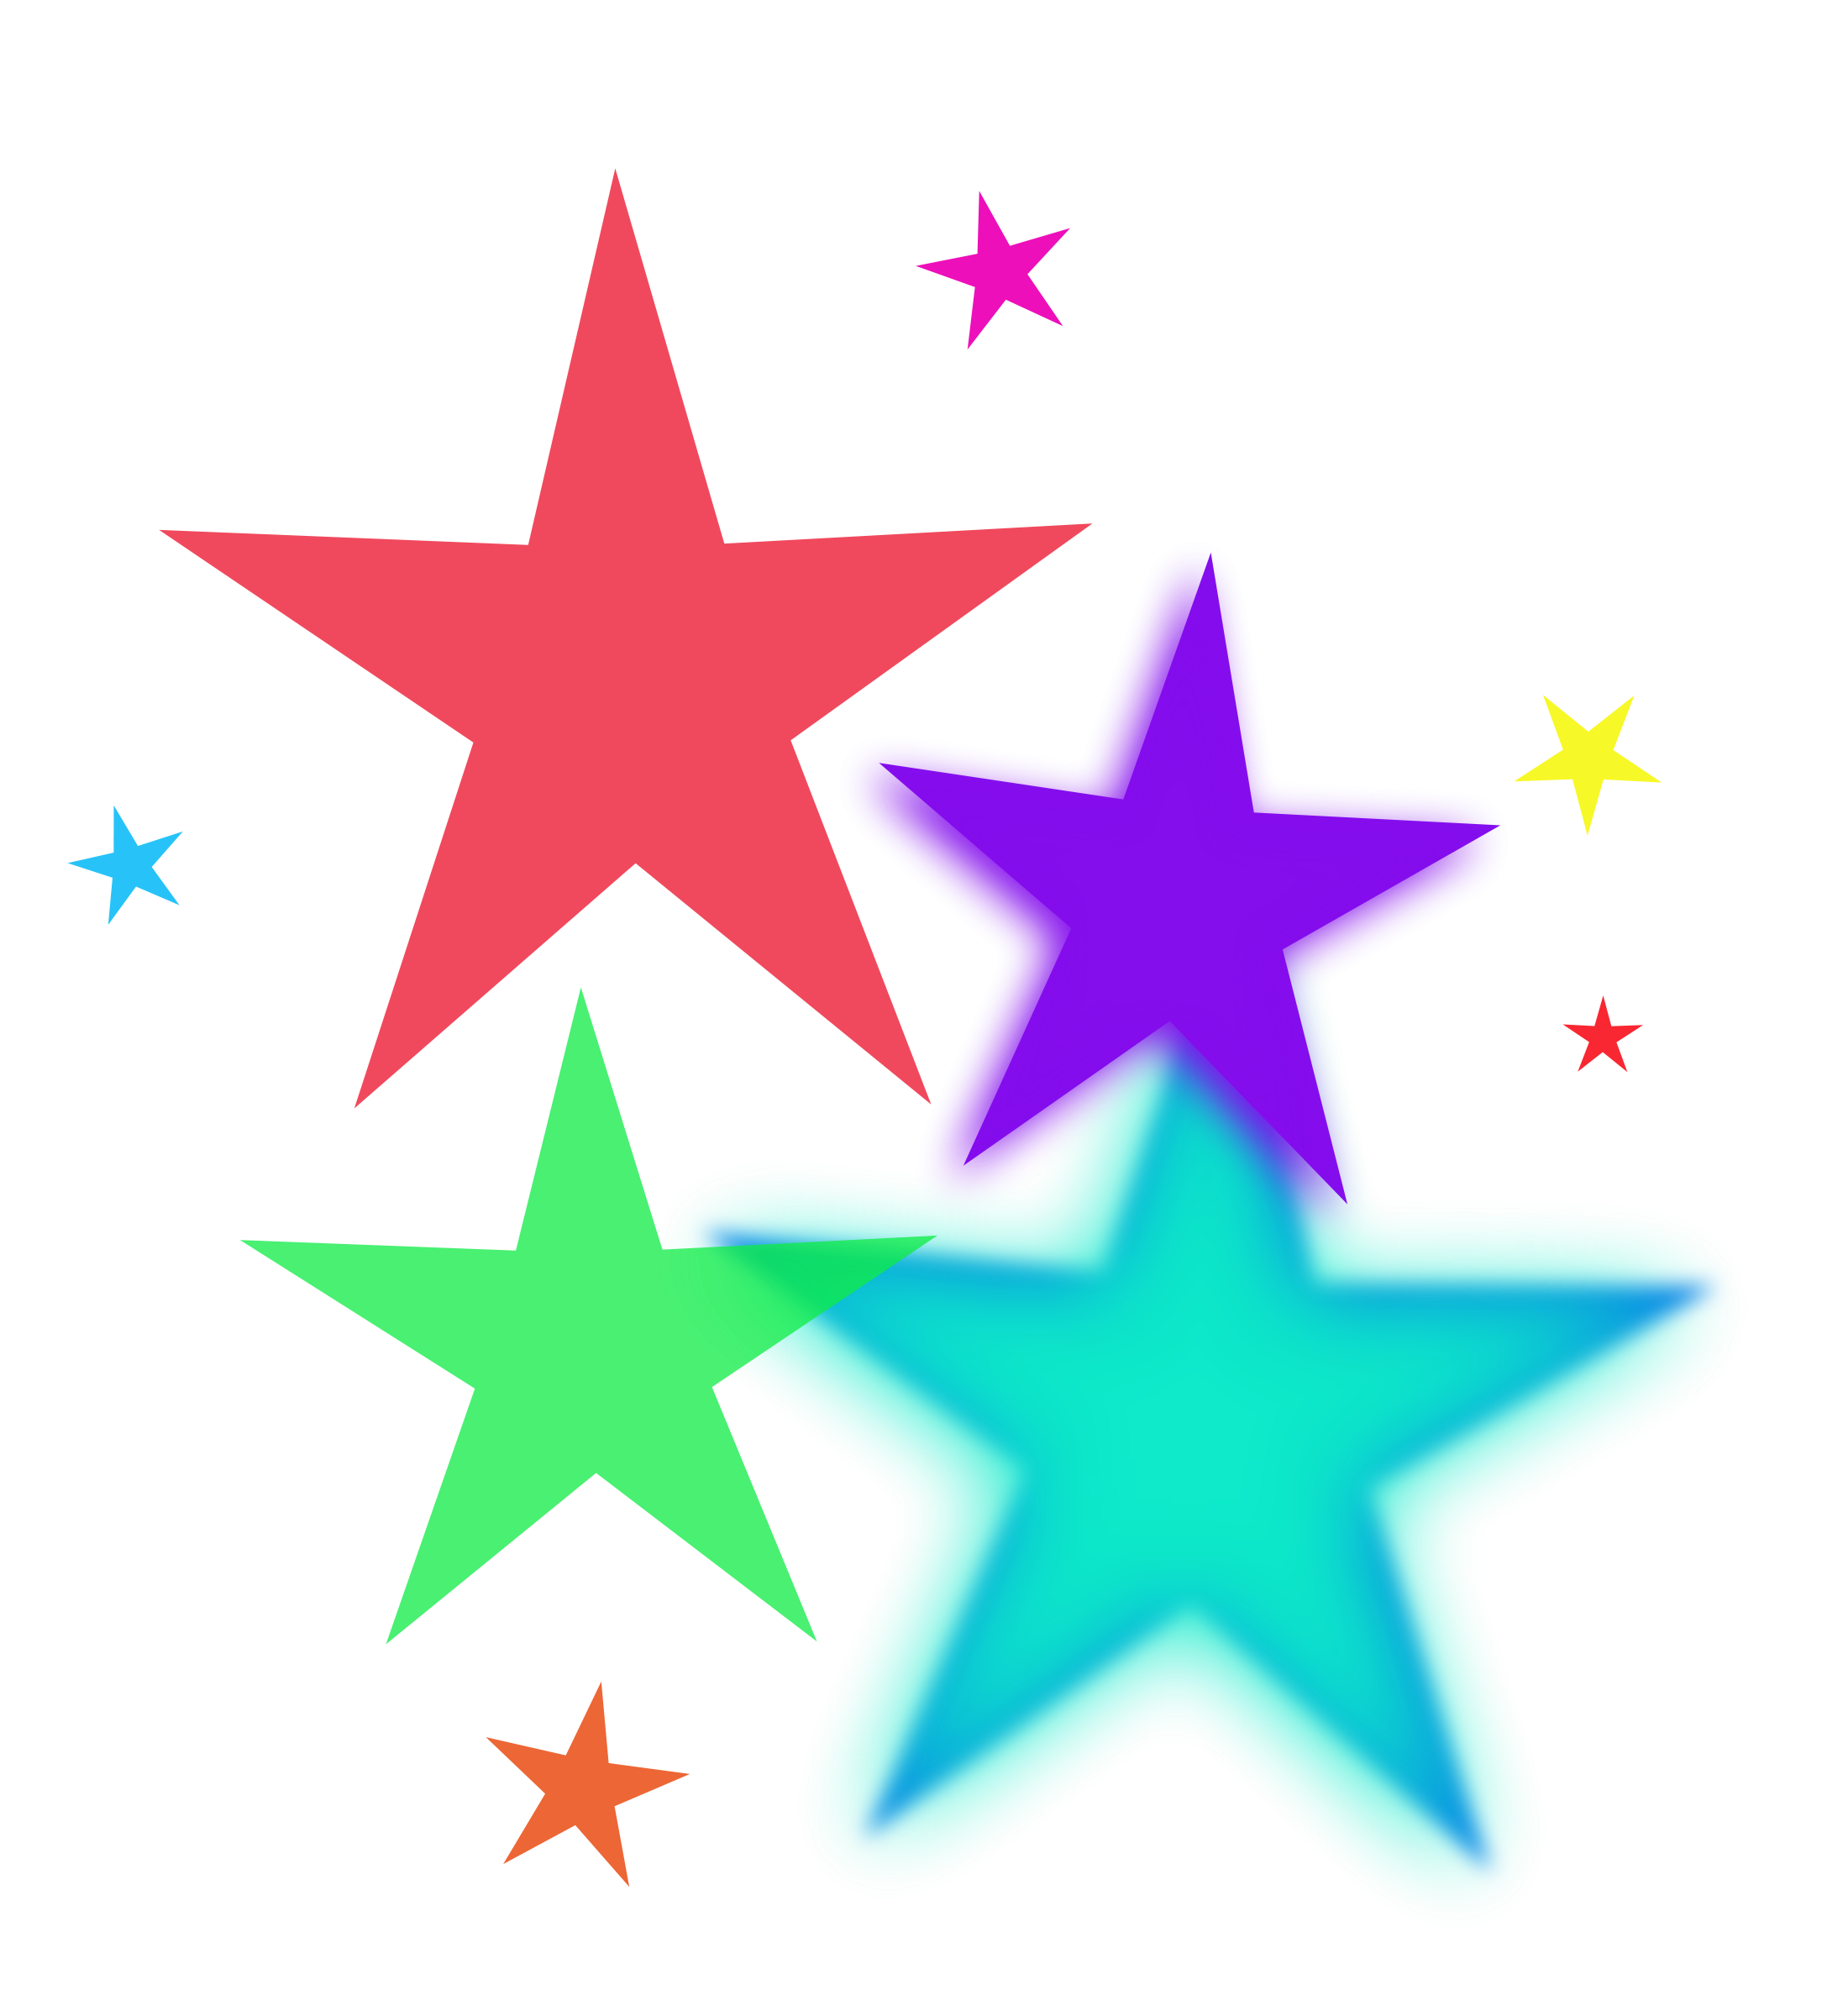 Colorful Stars And Swirls   Clipart Panda   Free Clipart Images